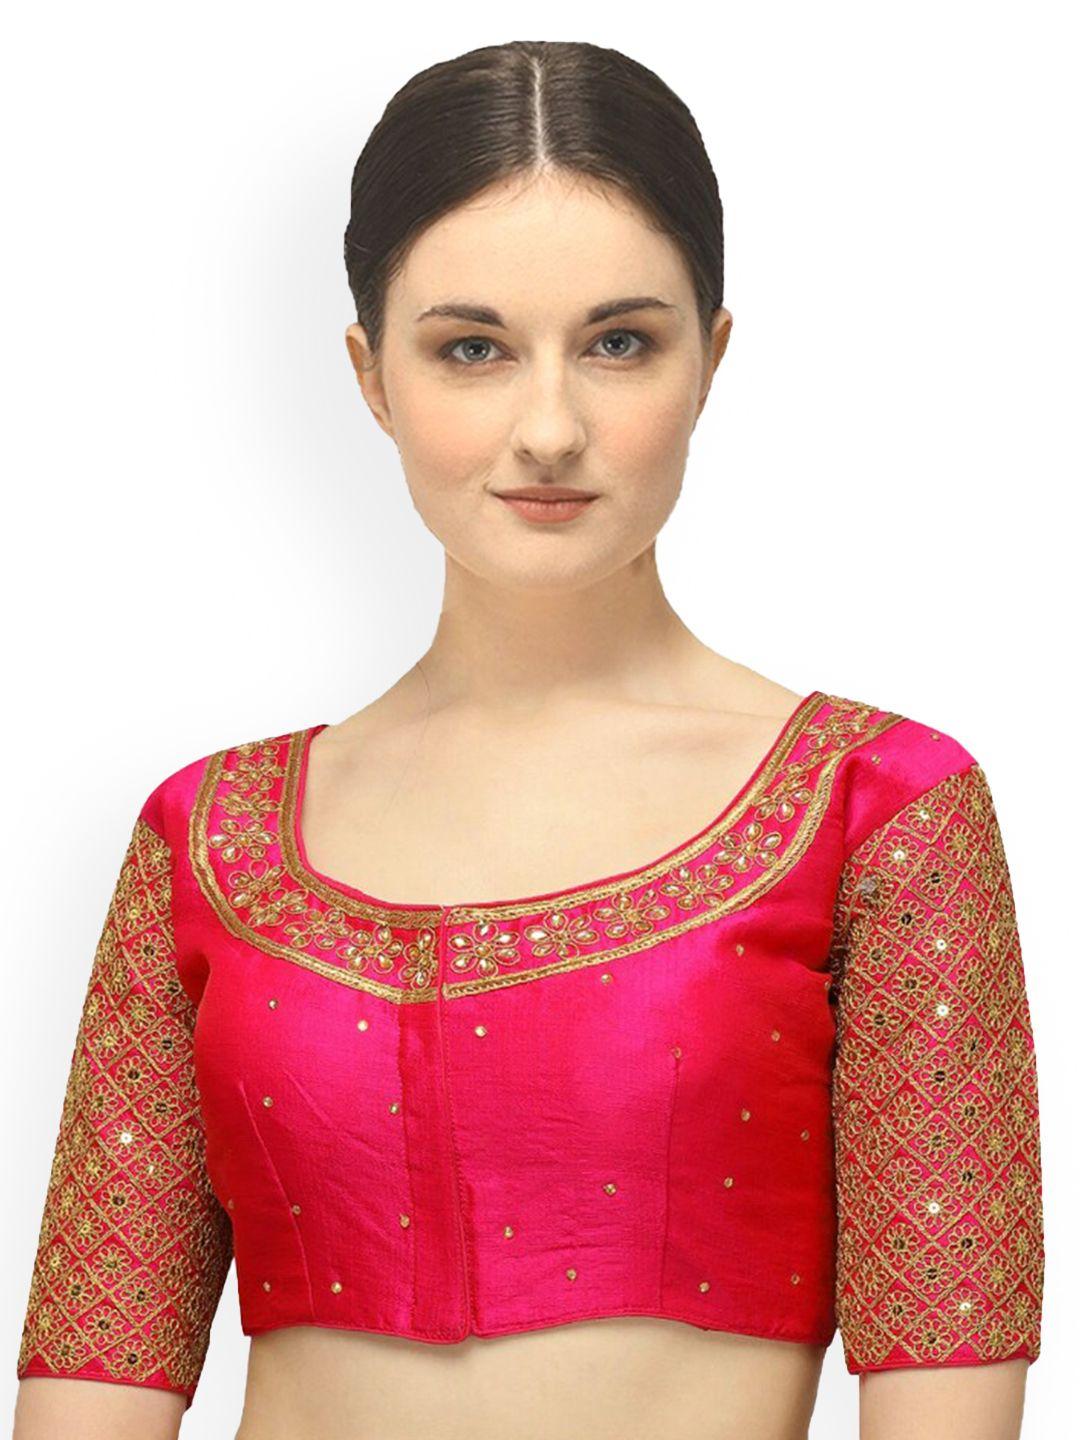 Sumaira Tex Women Peach-Colored & Gold-Colored Embroidered Readymade Saree Blouse